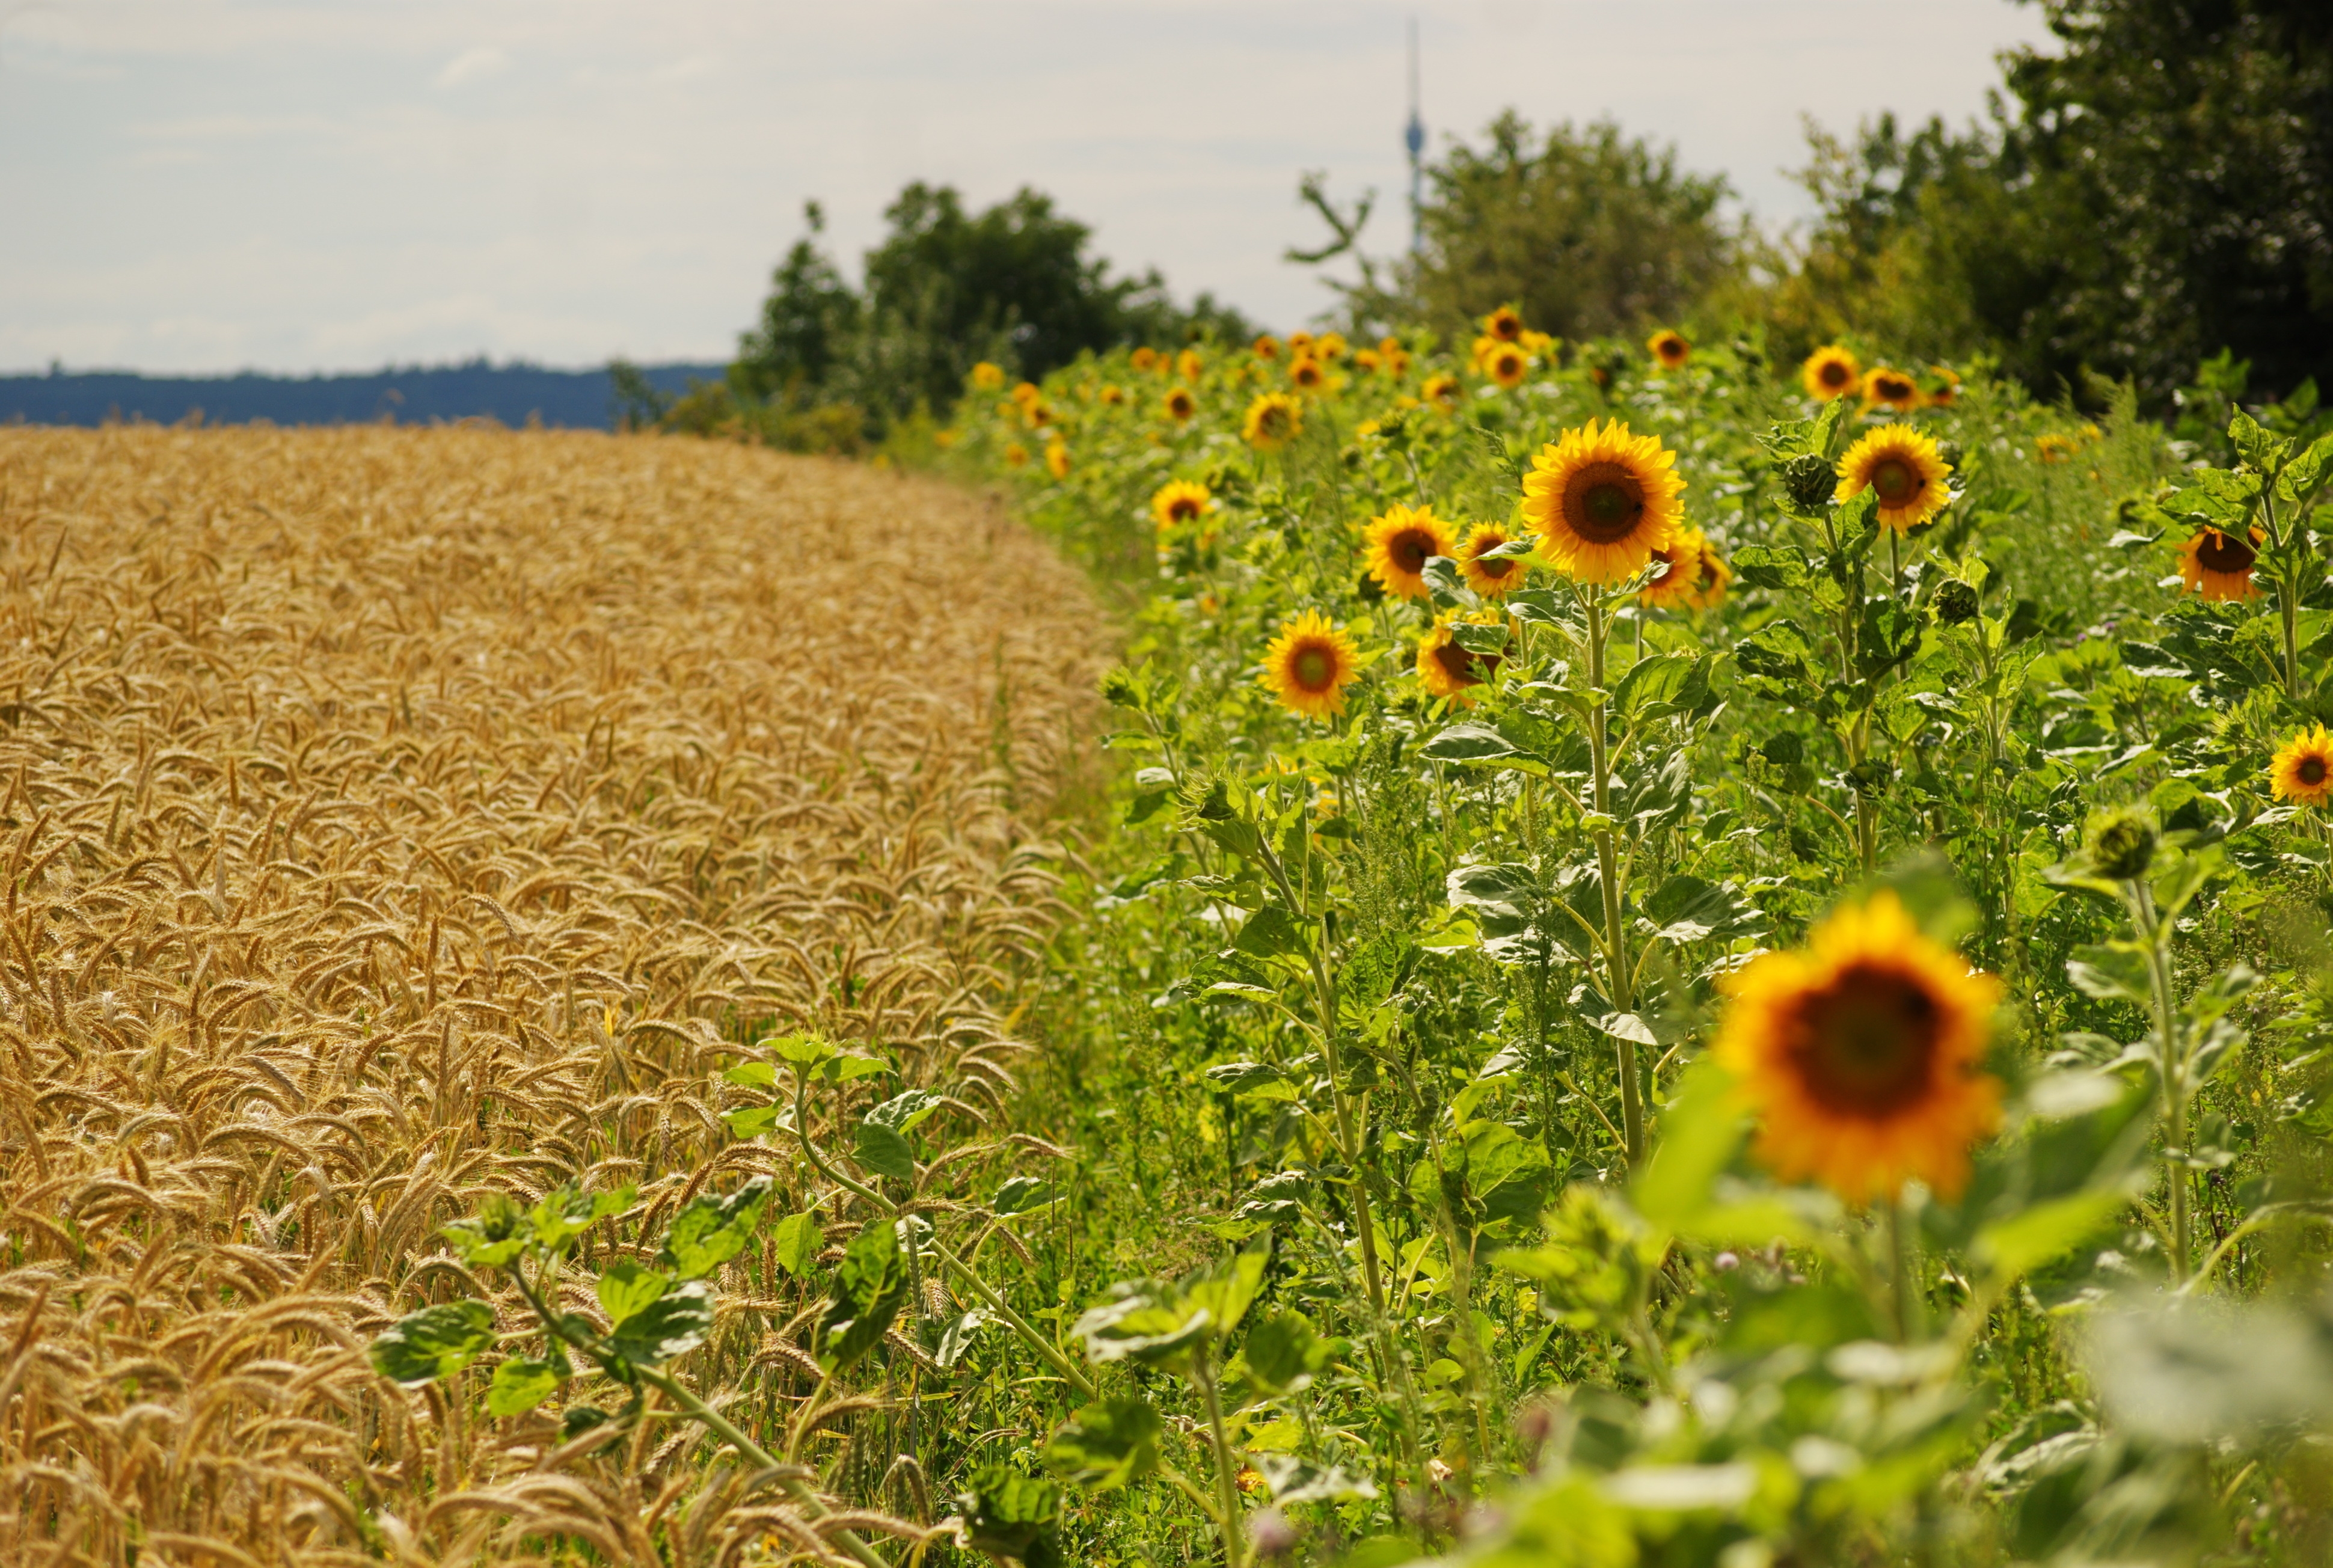 99941 download wallpaper nature, fields, sunflowers, summer, ears, spikes, border screensavers and pictures for free